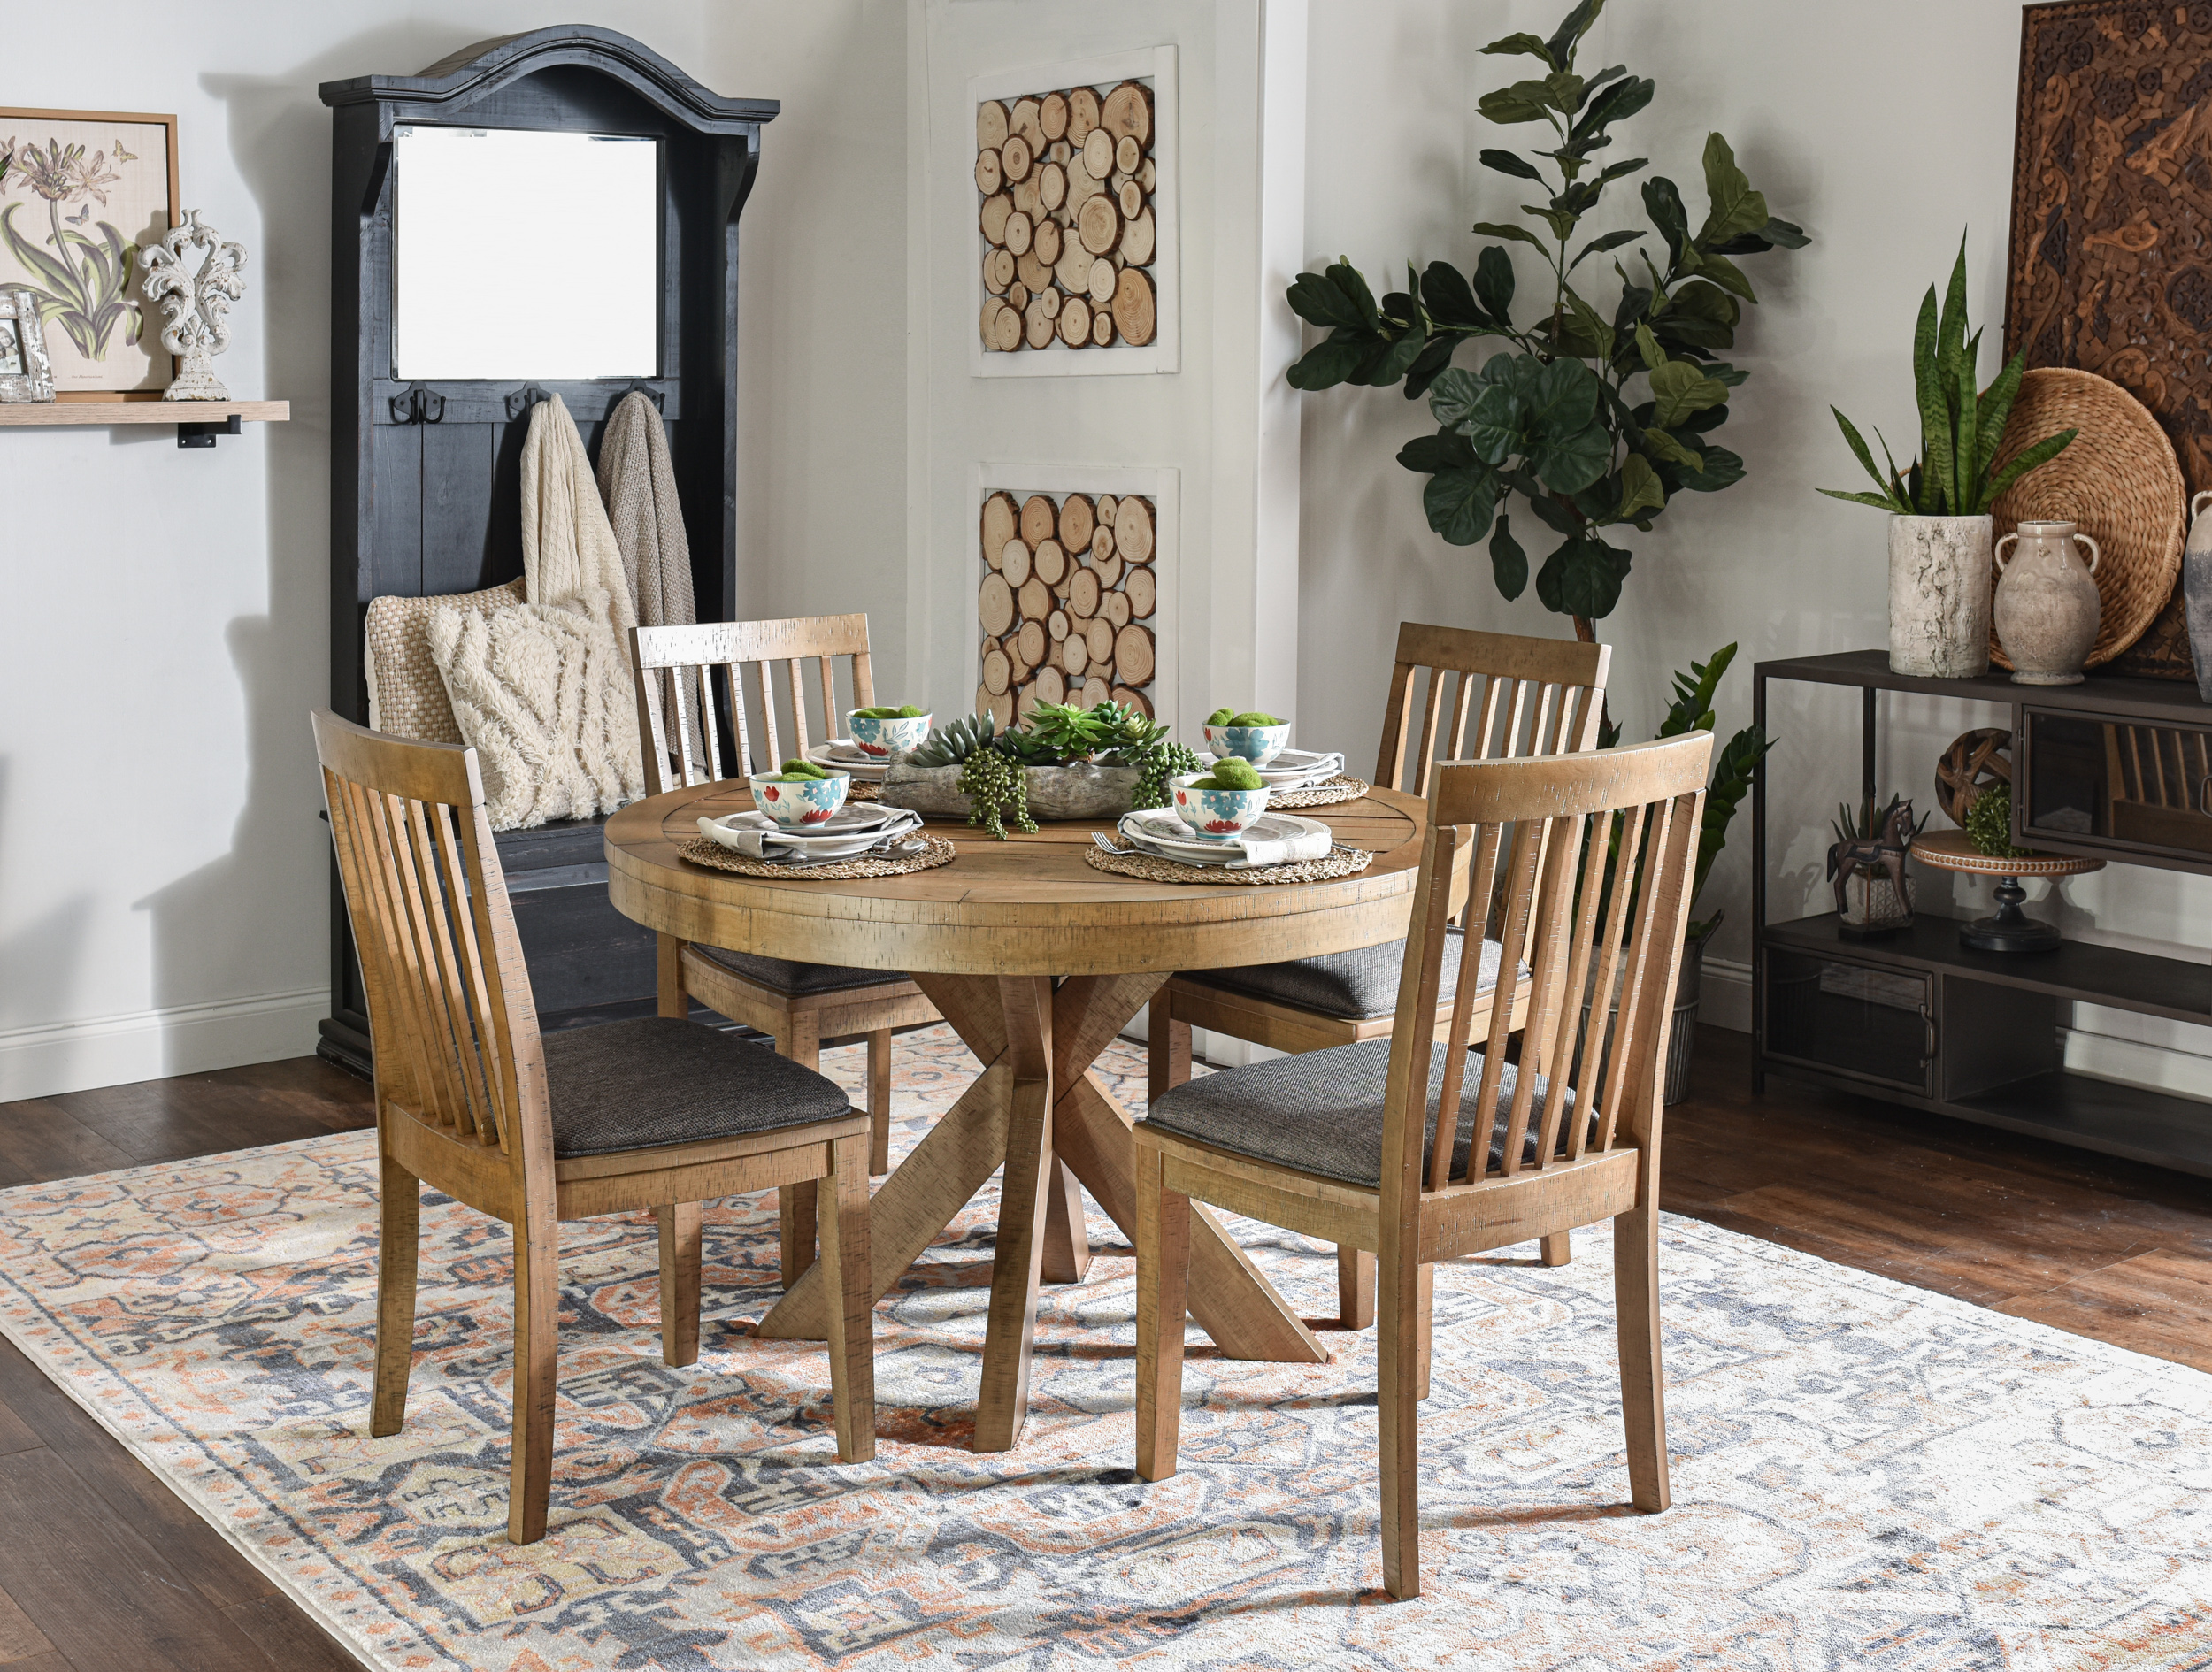 Trends in Dining Room Design | Home Zone Furniture